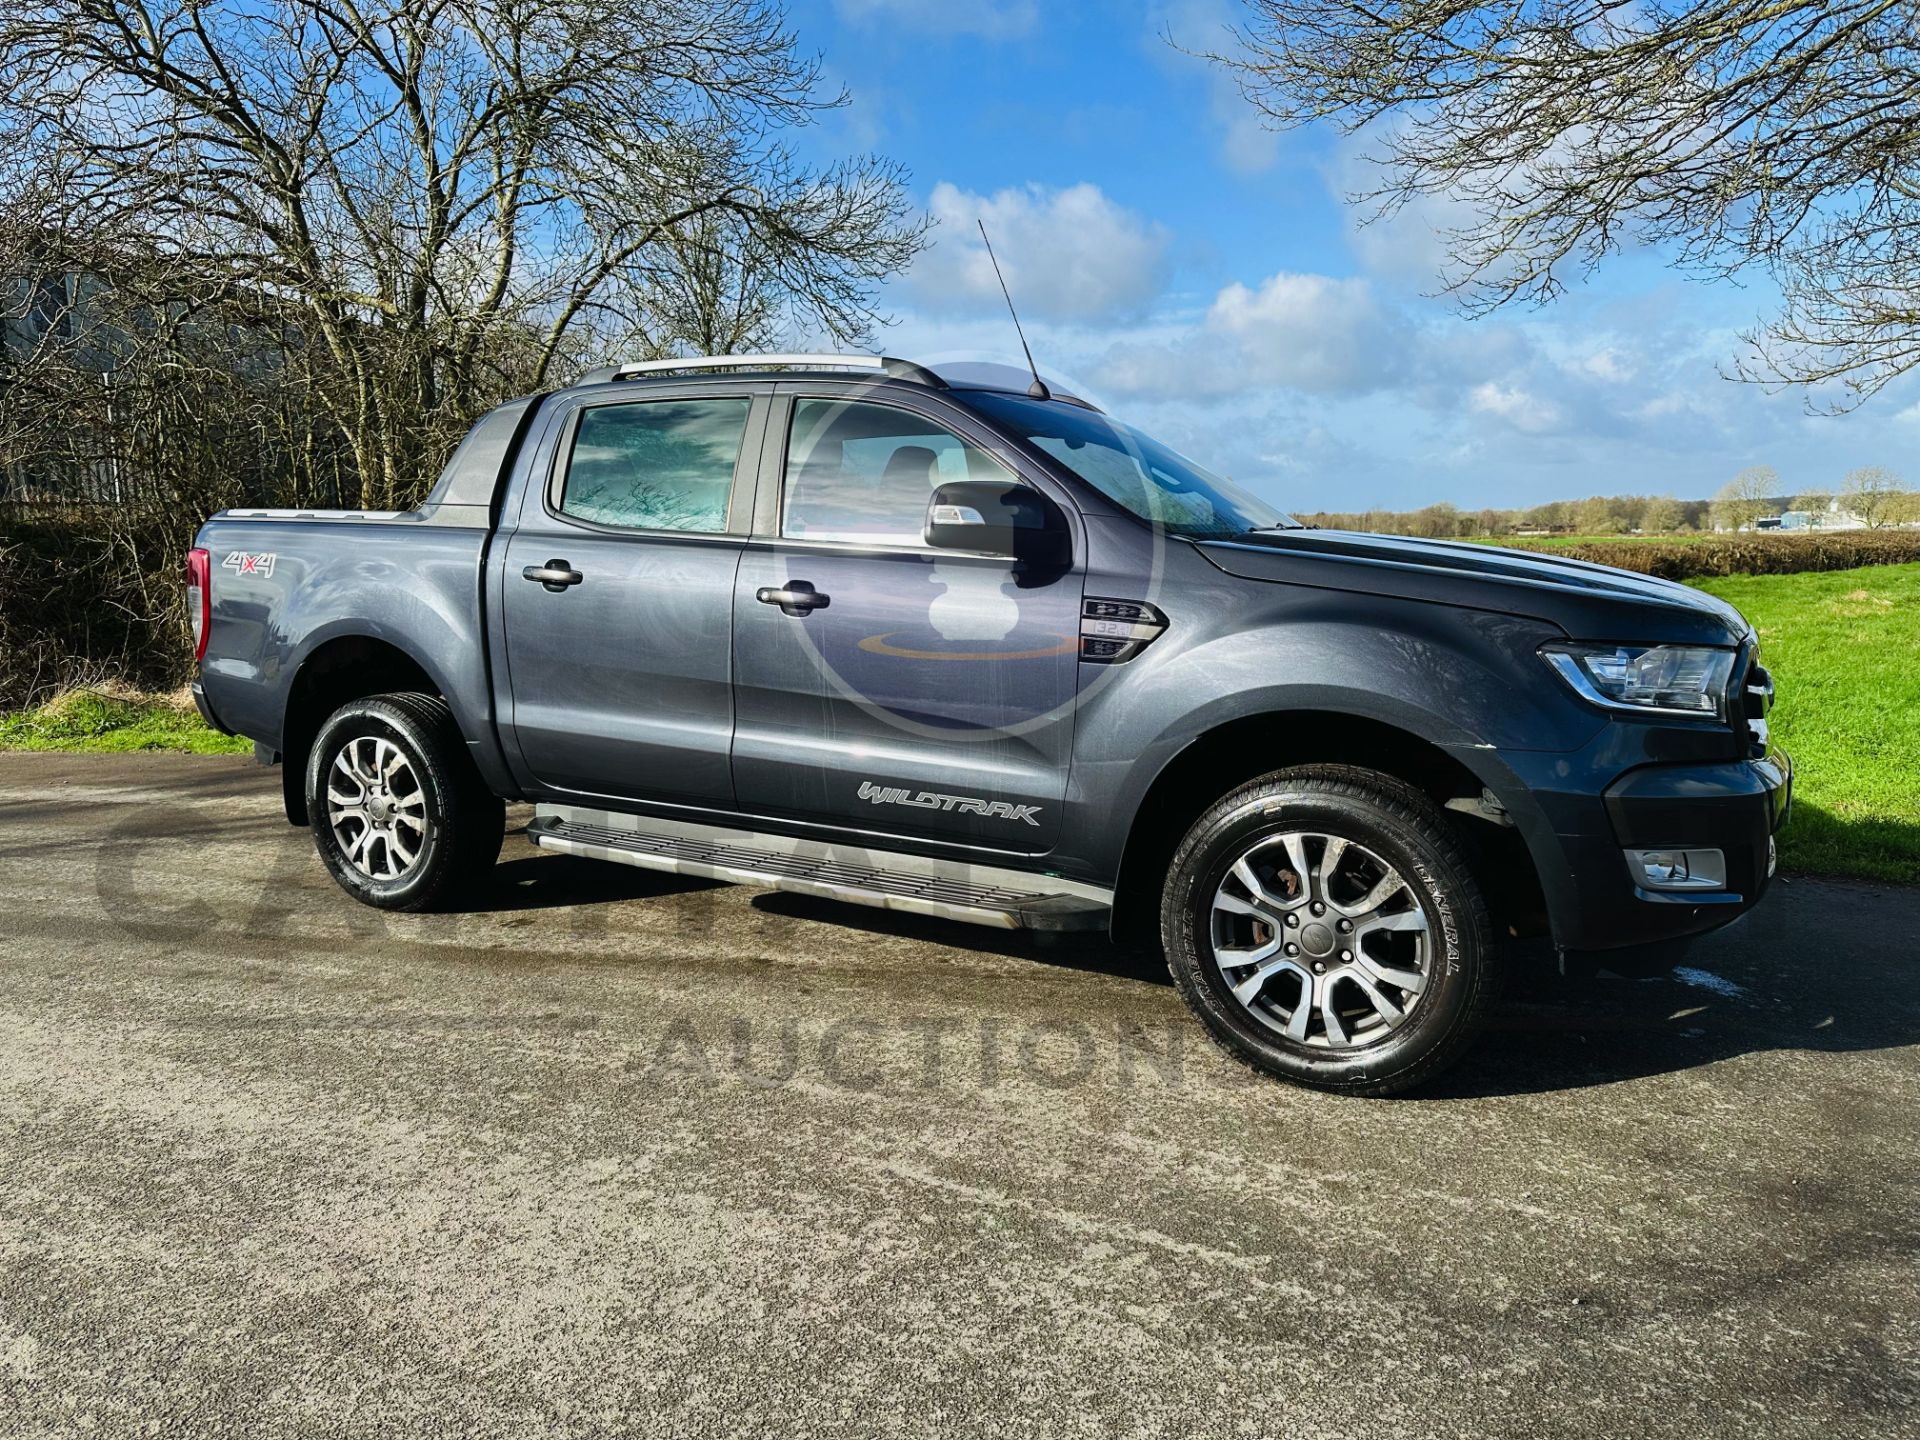 FORD RANGER *WILDTRAK EDITION* DOUBLE CAB PICK-UP (2018 - EURO 6) 3.2 TDCI - AUTOMATIC (1 OWNER)